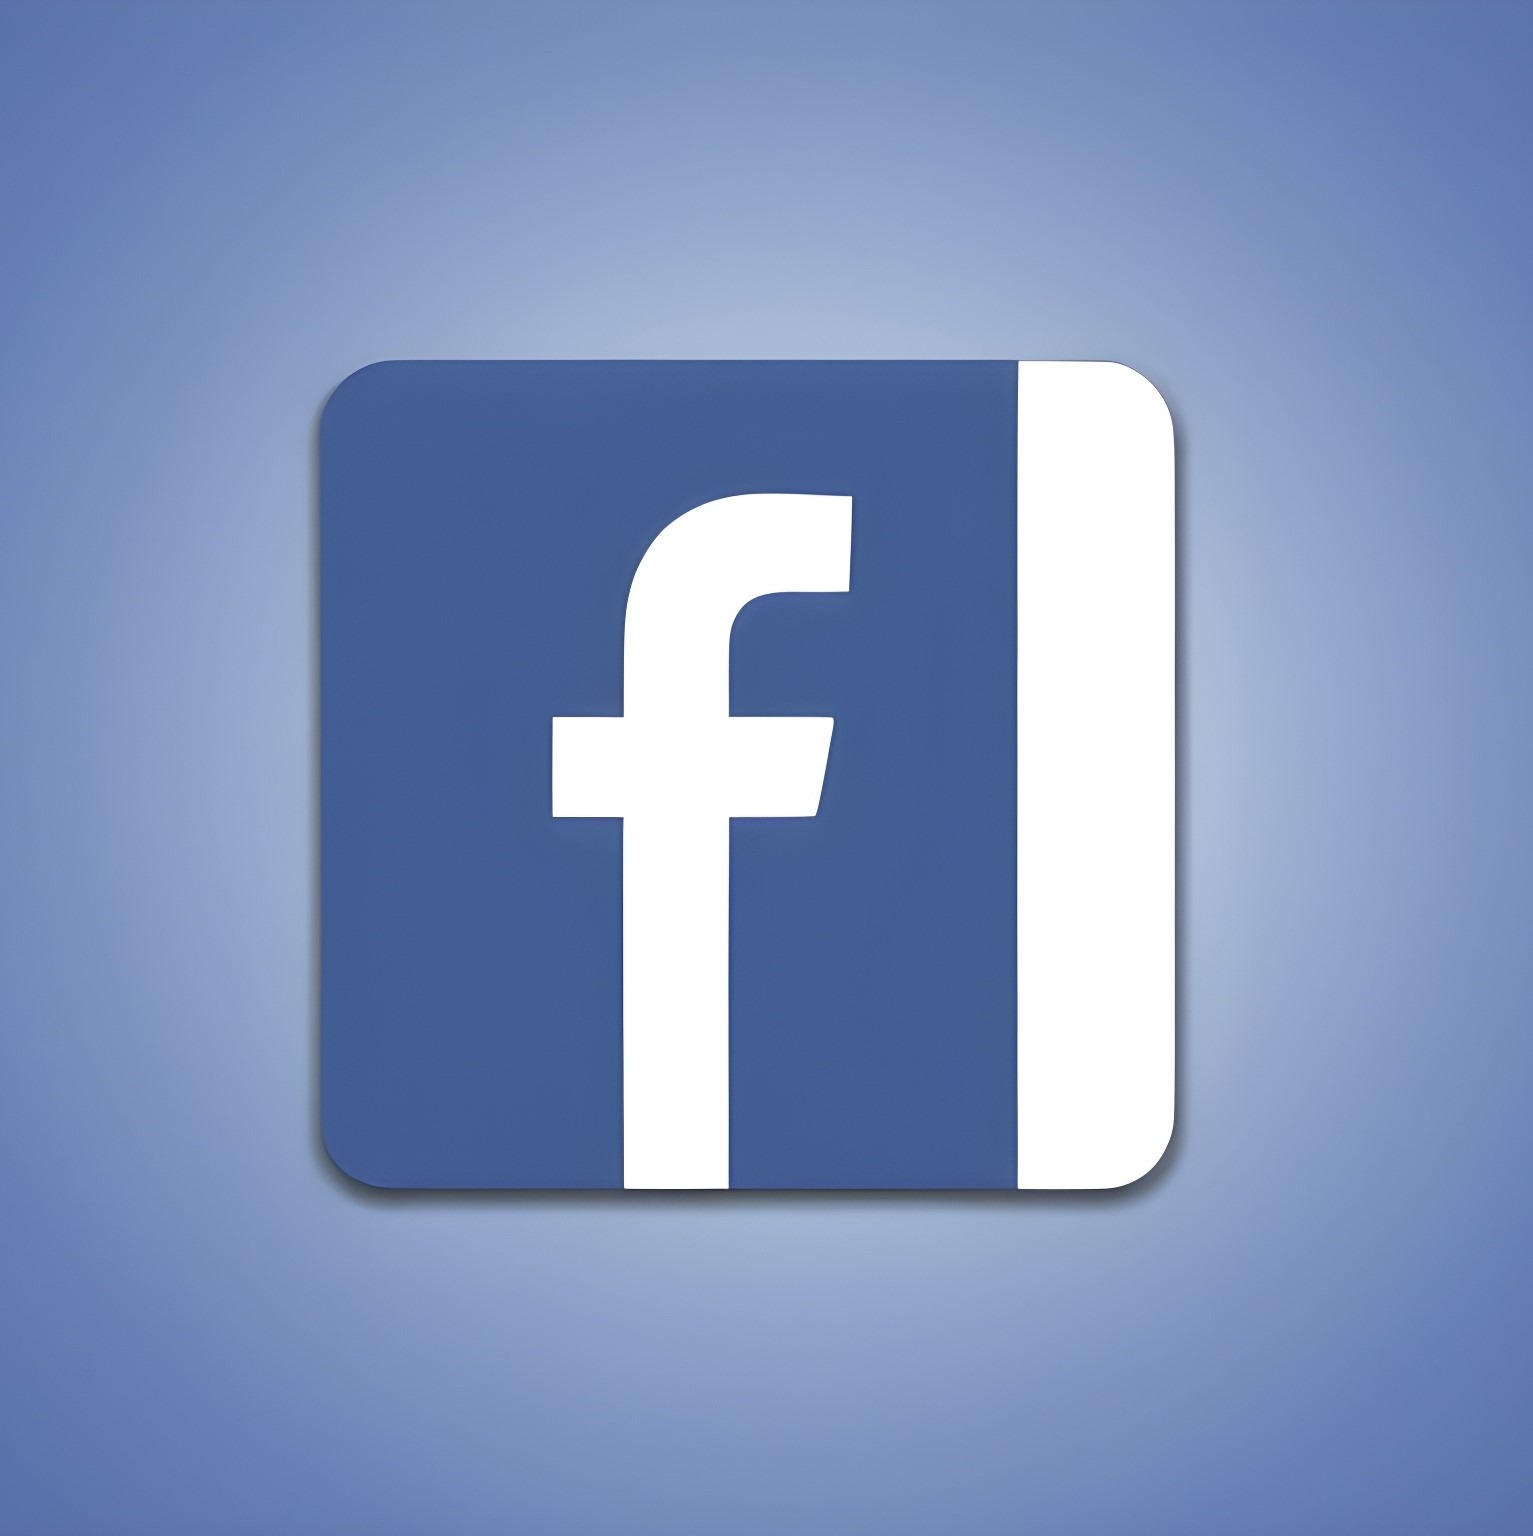 create-an-image-which-contain-facebook-logo-and-ba-upscaled